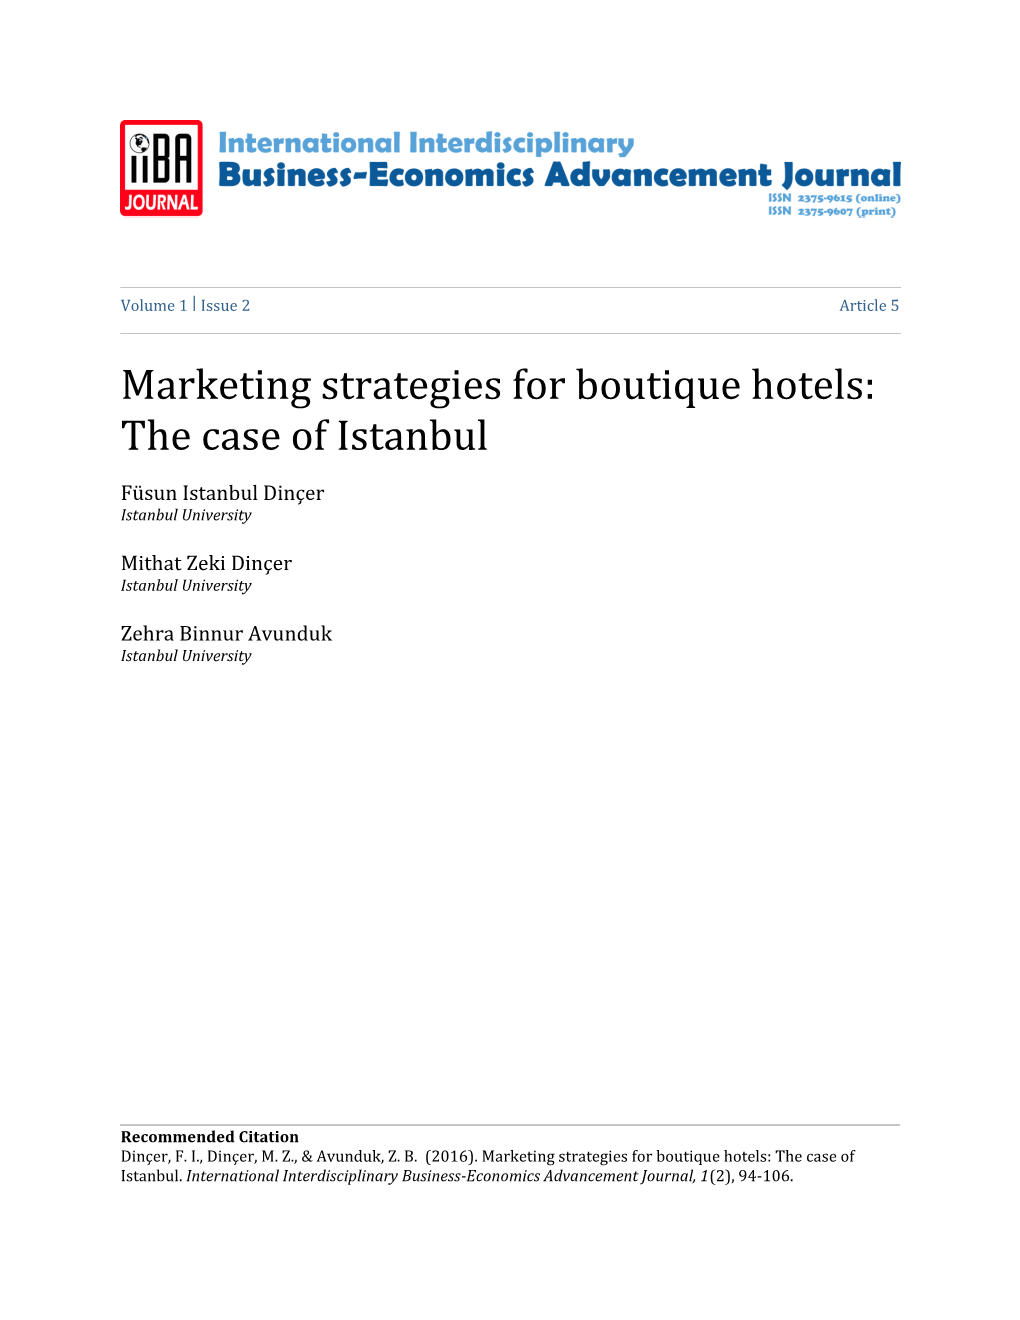 Marketing Strategies for Boutique Hotels: the Case of Istanbul